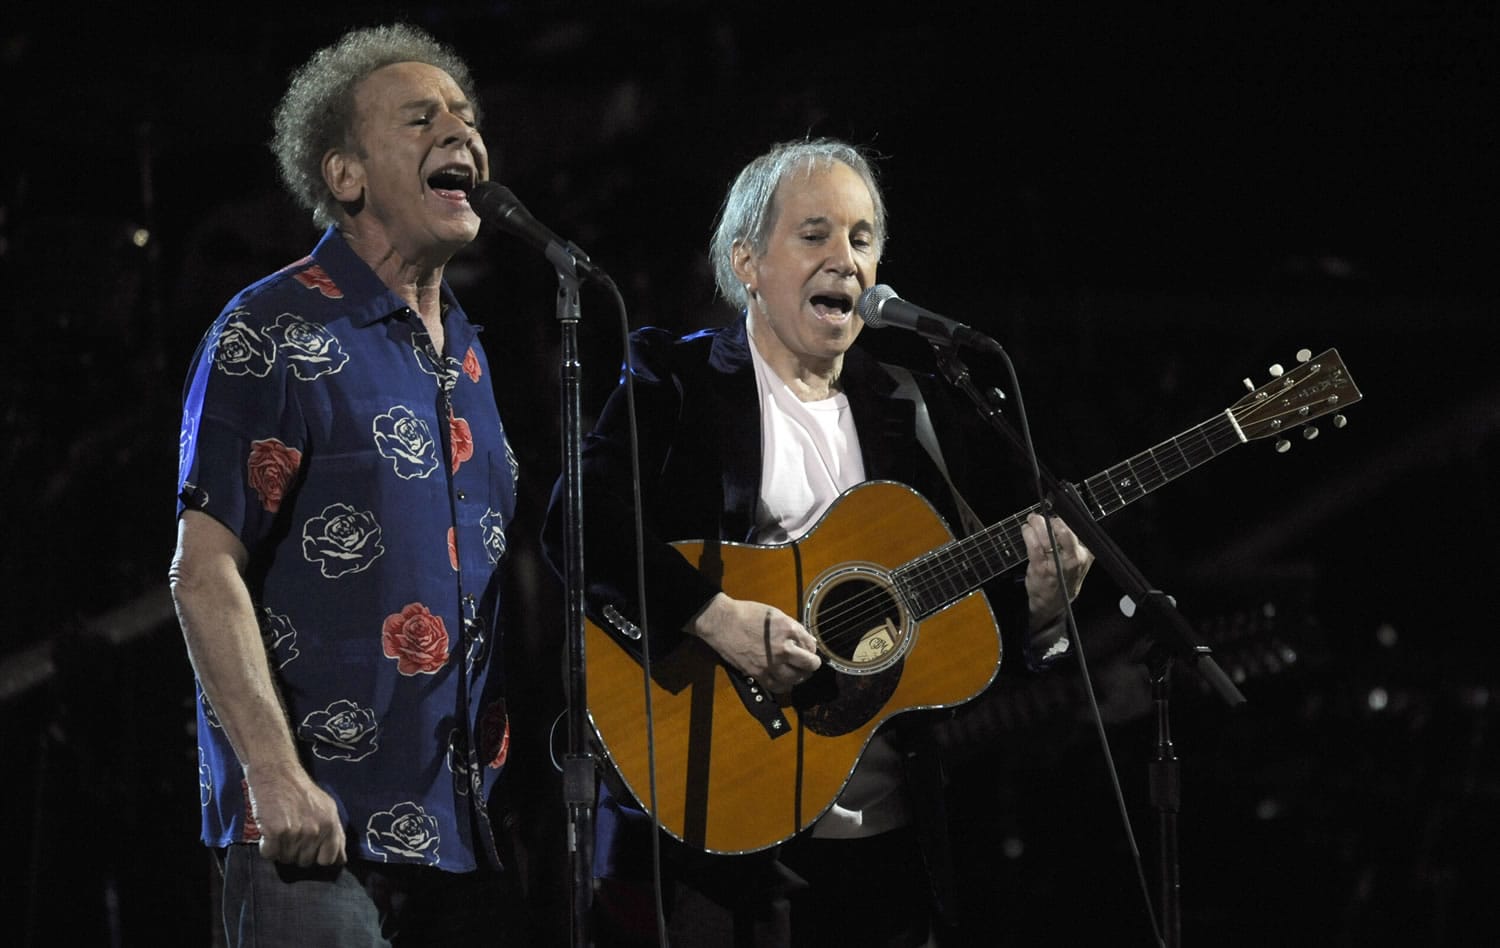 Paul Simon, right, and Art Garfunkel perform at the 25th Anniversary Rock &amp; Roll Hall of Fame concert at Madison Square Garden in New York.